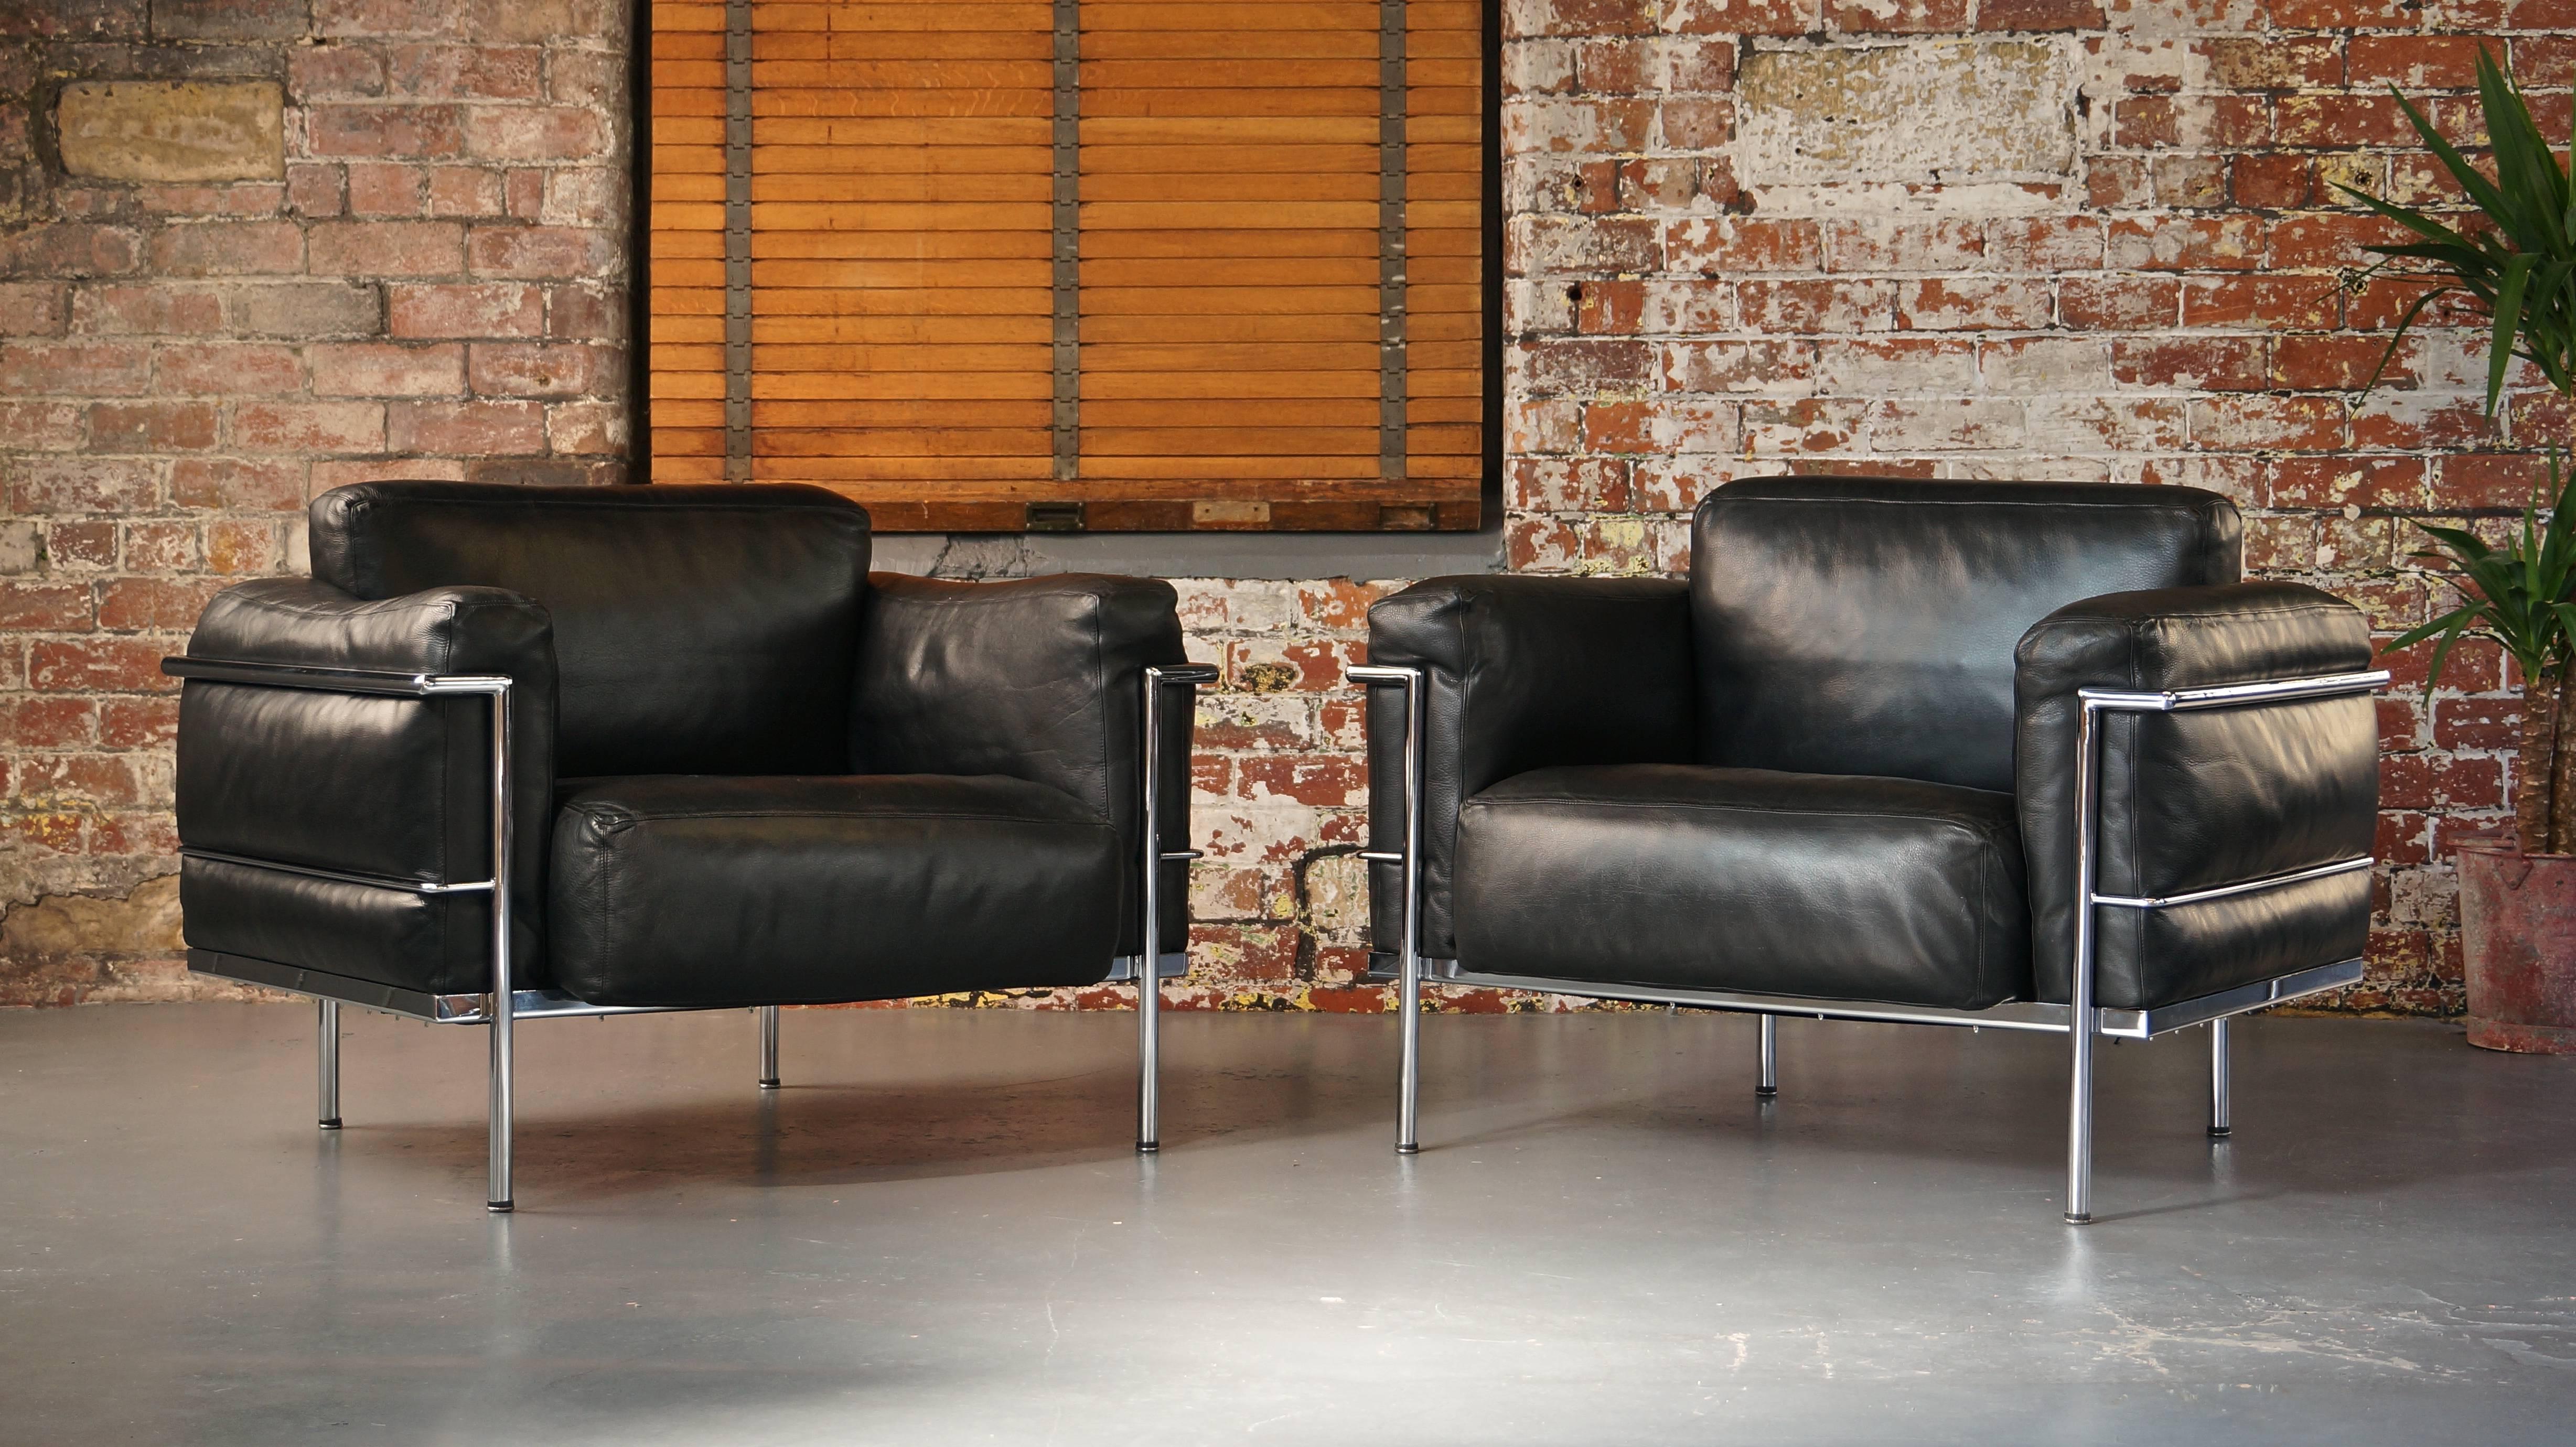 Pair of vintage leather Grand Confort LC3 lounge chairs or armchairs

Designed by Le Corbusier, Italy, 1927 

Very high quality pair of LC3 Grand Confort Lounge Chairs in high quality black leather.

Both chairs have just been dismantled and